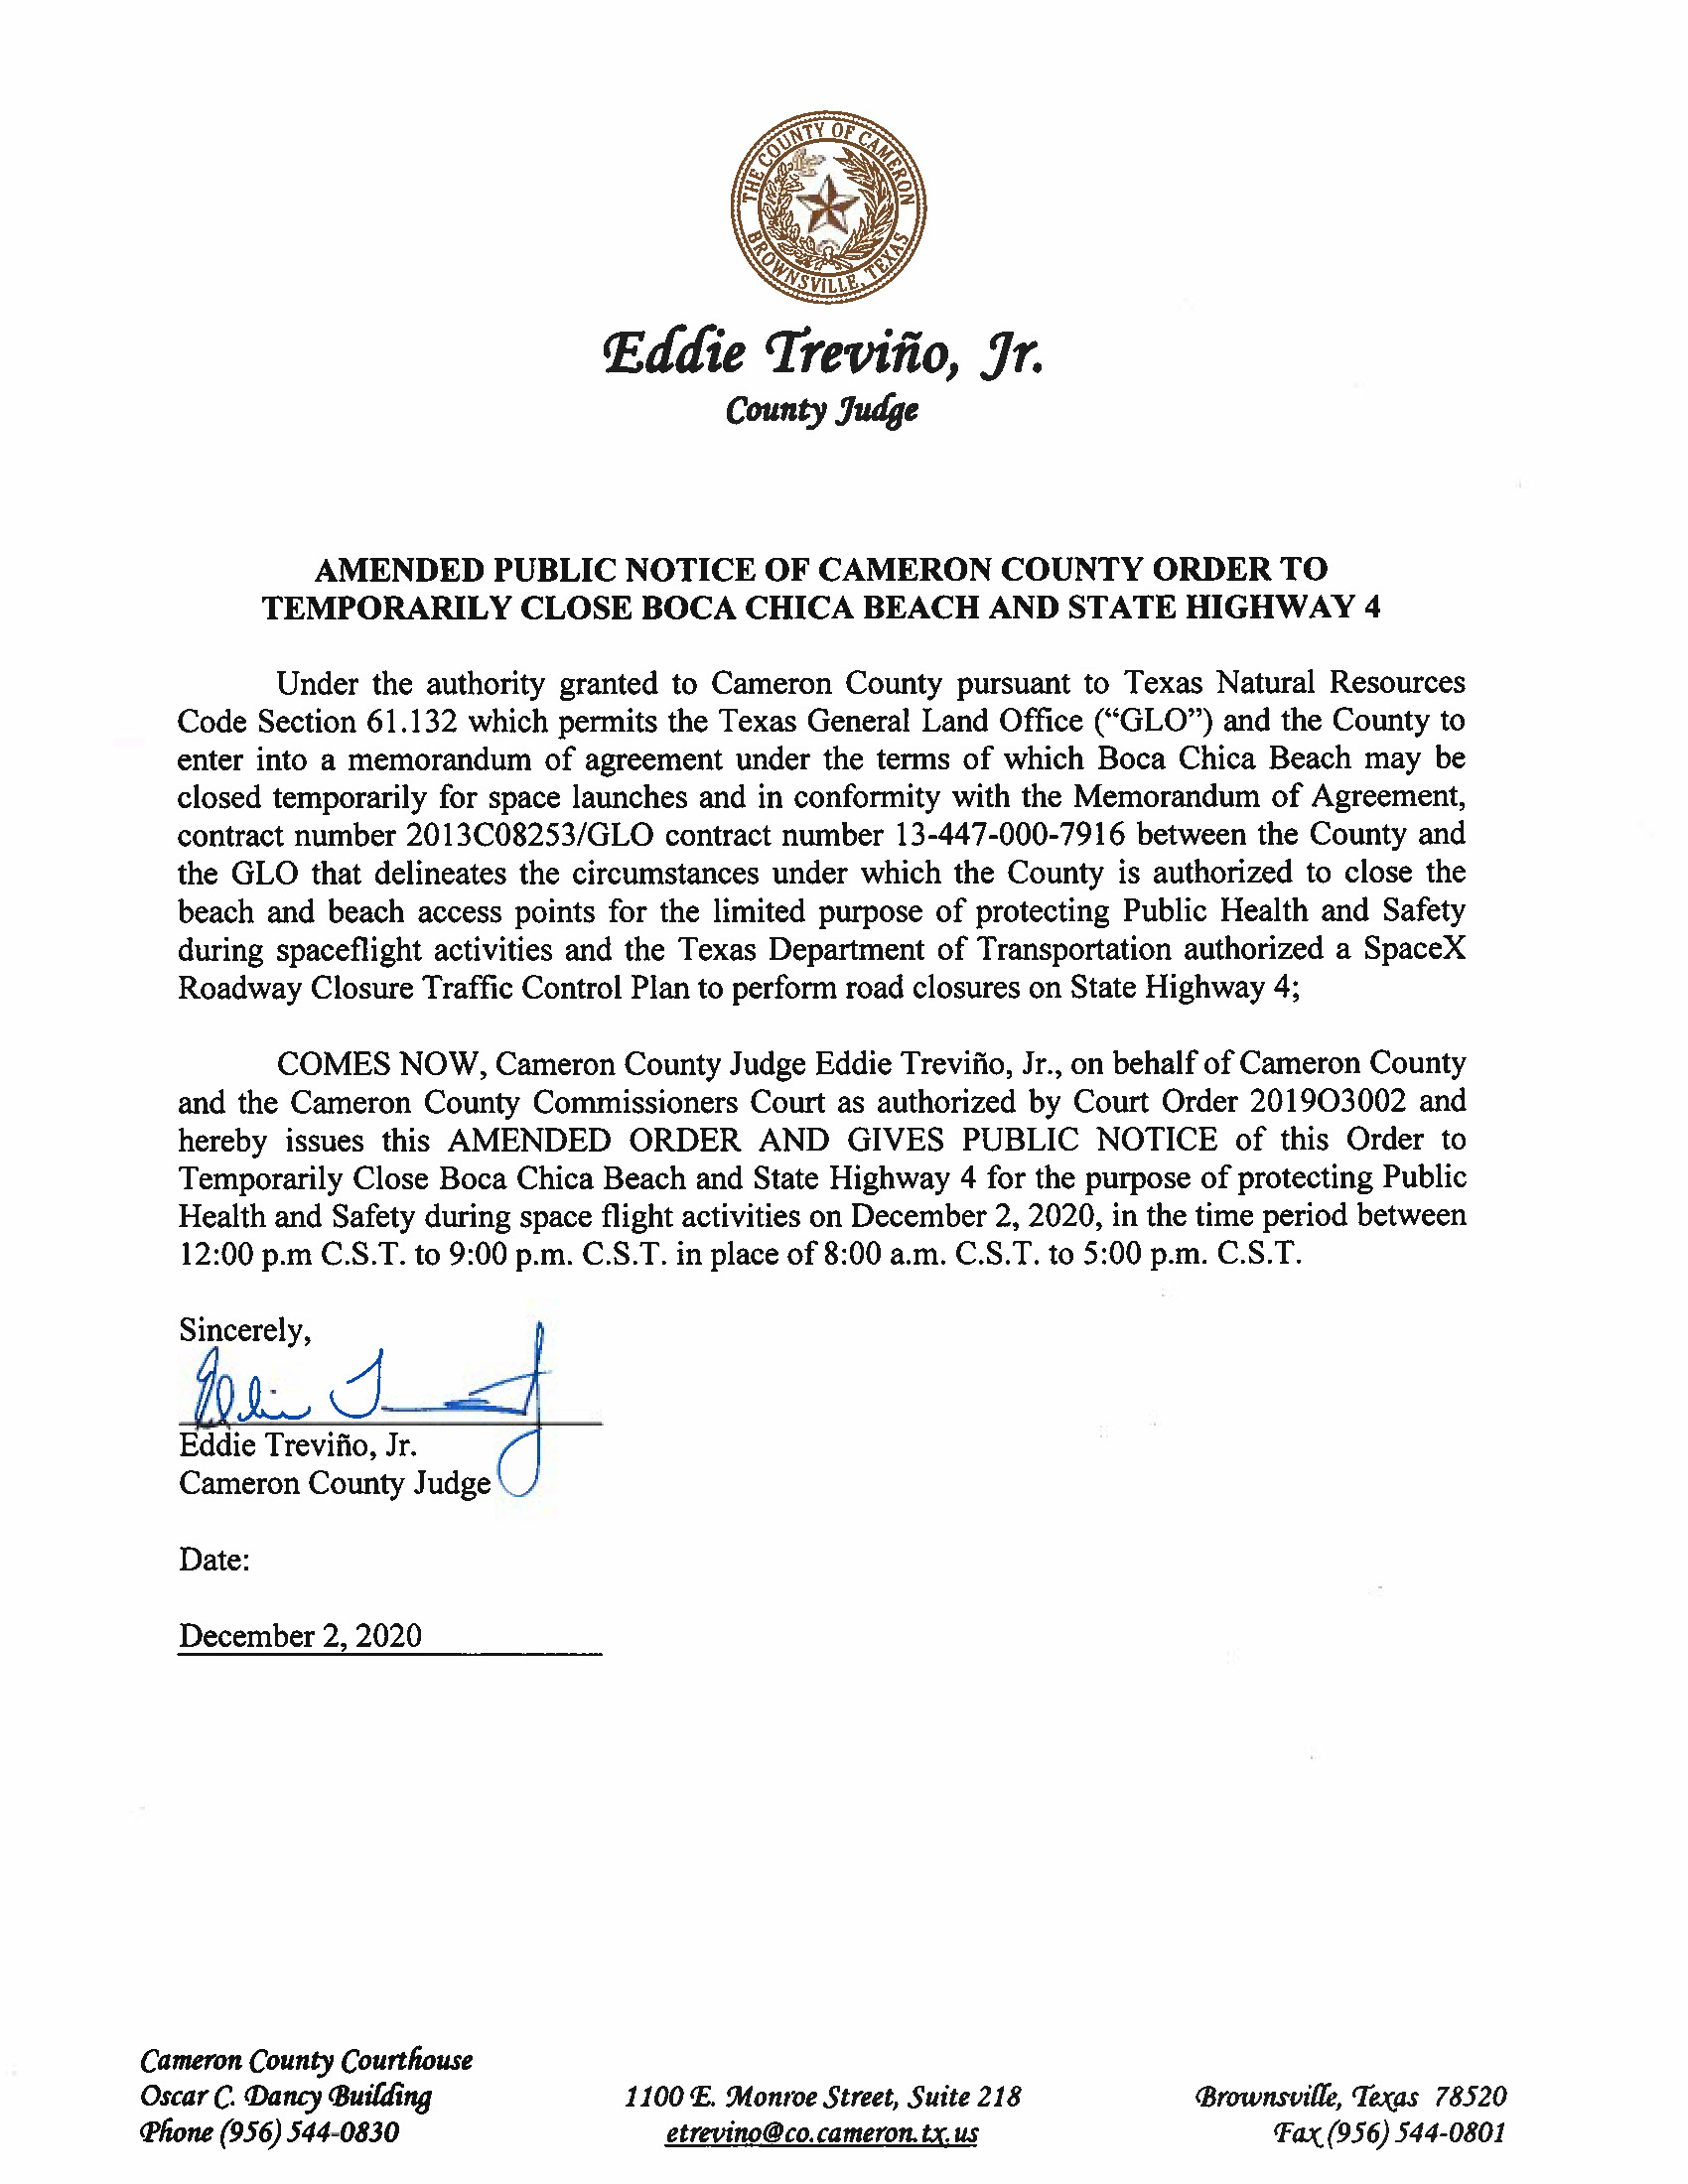 AMENDMENT PUBLIC NOTICE OF CAMERON COUNTY ORDER TO TEMP. BEACH CLOSURE AND HWY.12.02.20